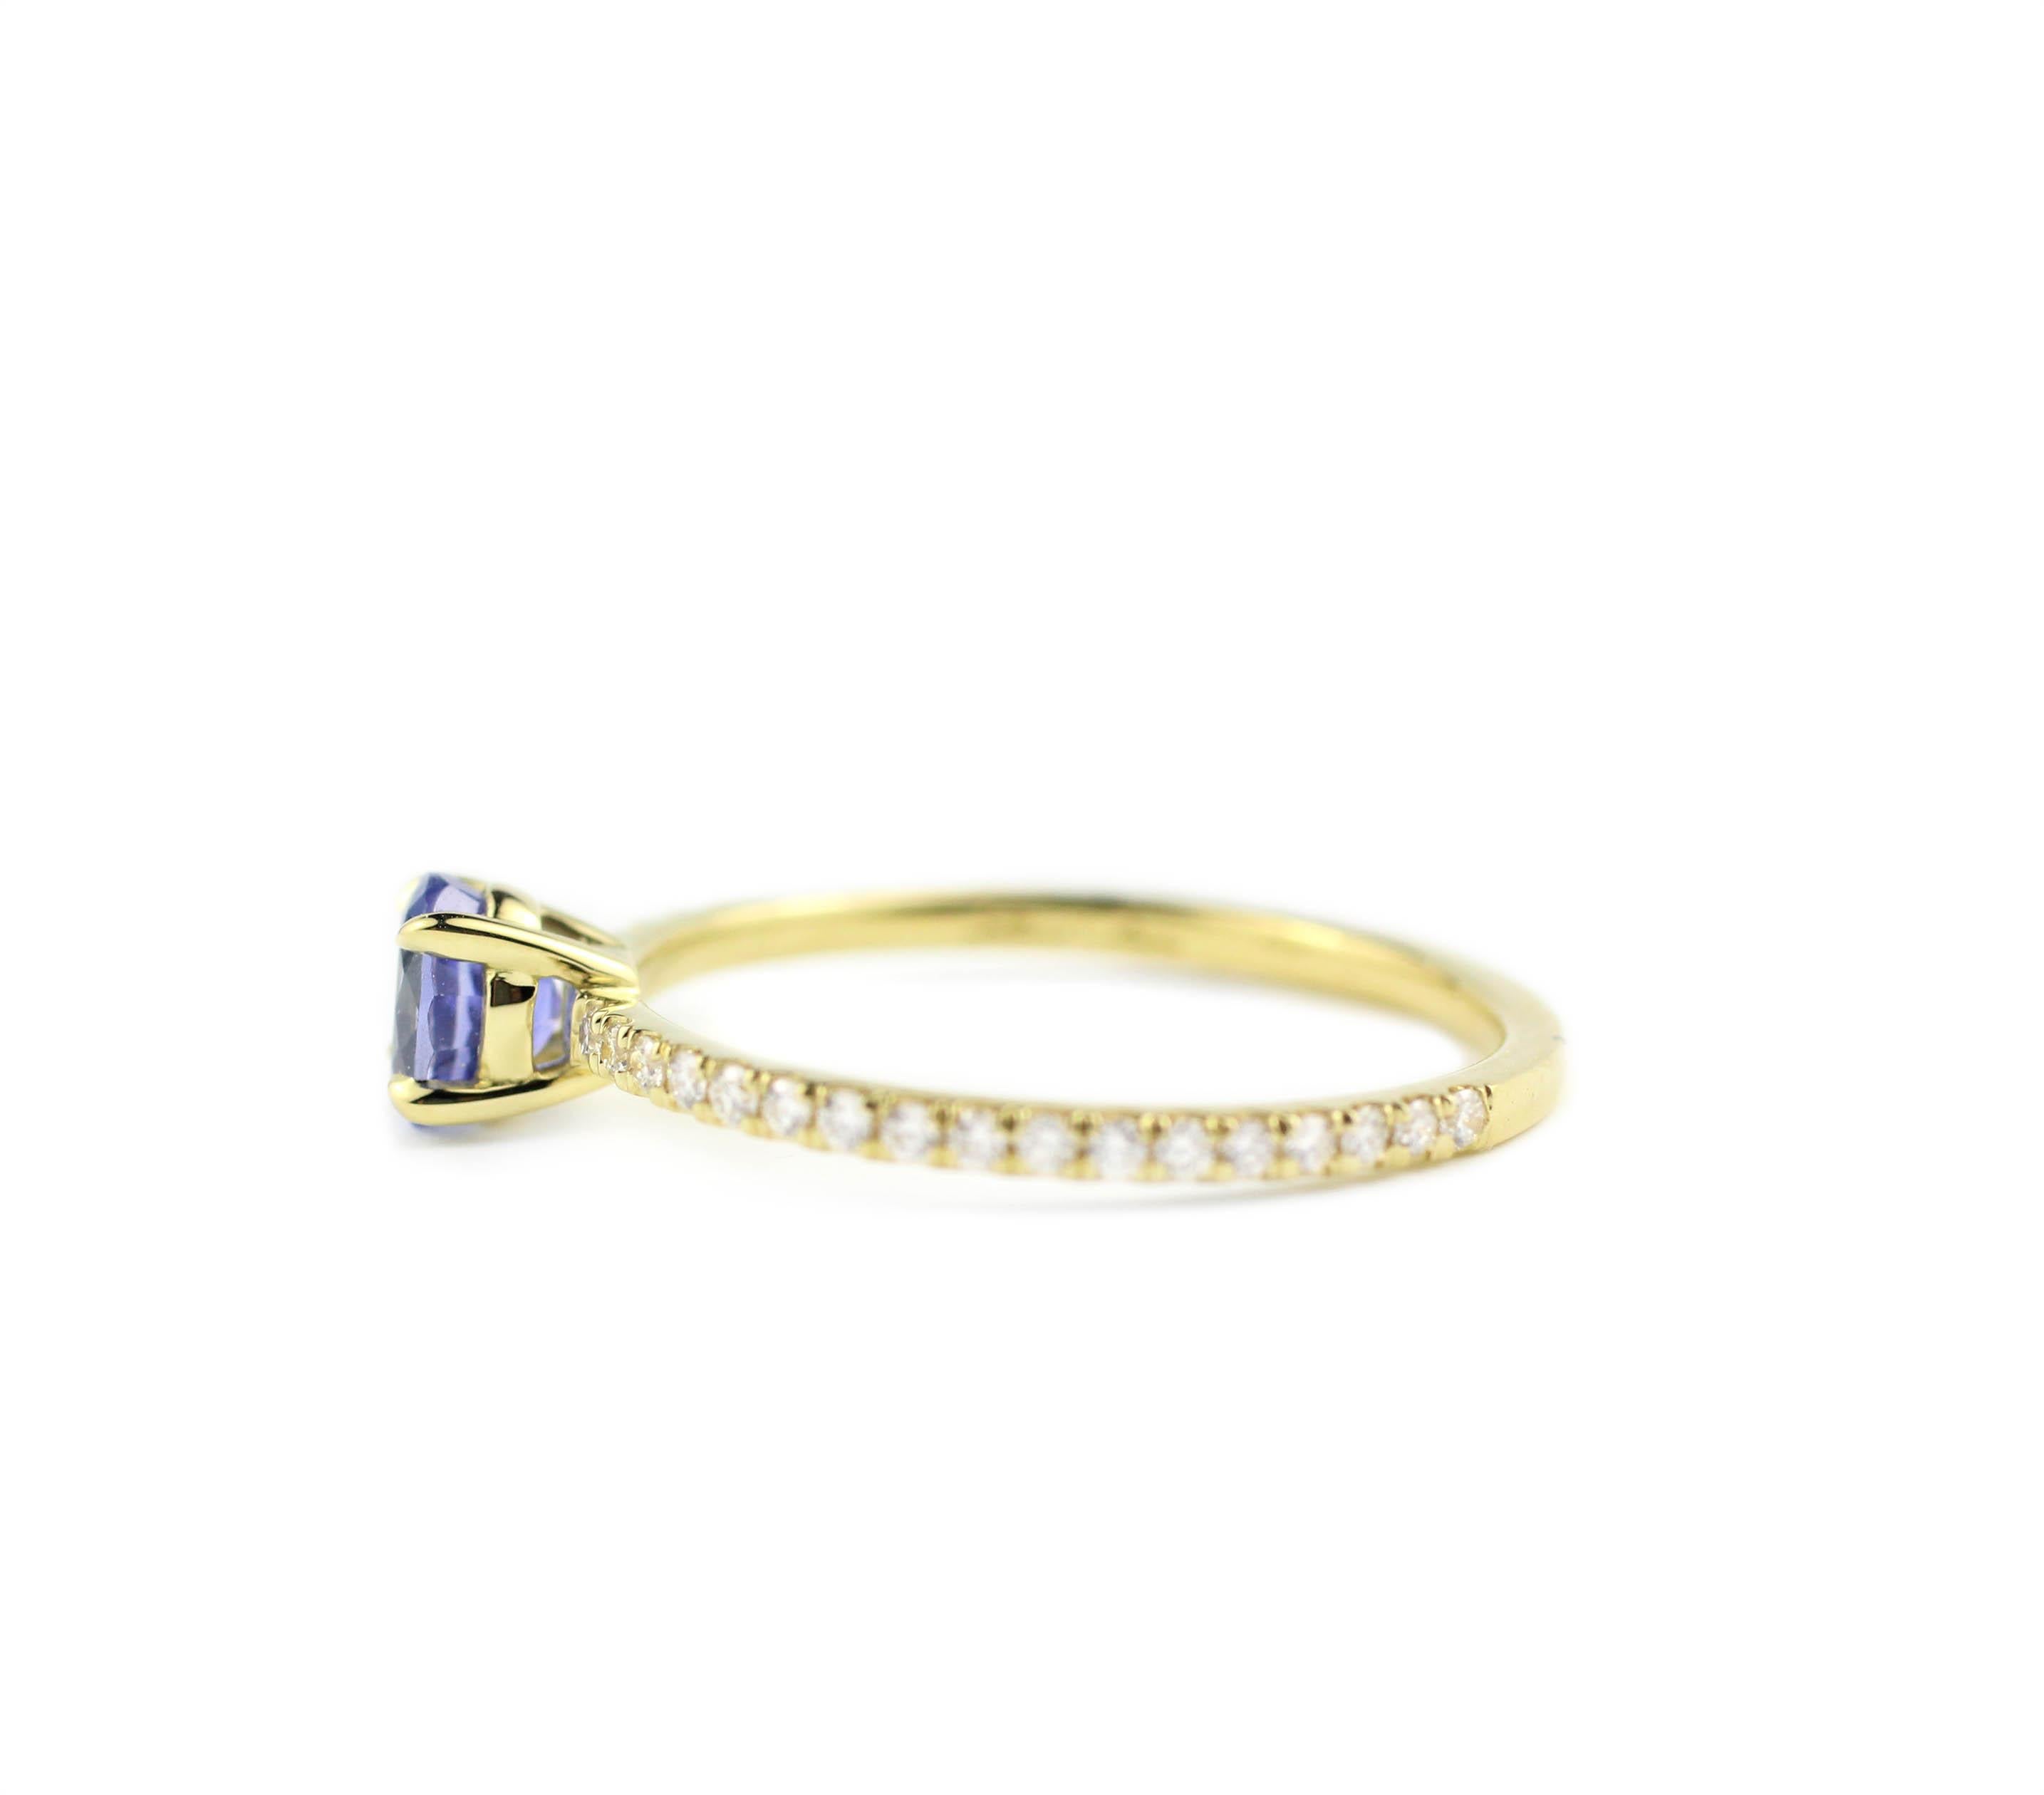 18 Kt Gold, Diamond and Sapphire Ring 

Containing 1 bright, periwinkle Blue Oval Sapphire (.55 Cts.).    The sparkling, cornflower blue stone really makes this ring sing.  The ring shank is set 3/4 around with 34 Brilliant Diamonds (.11 Cts.)
In